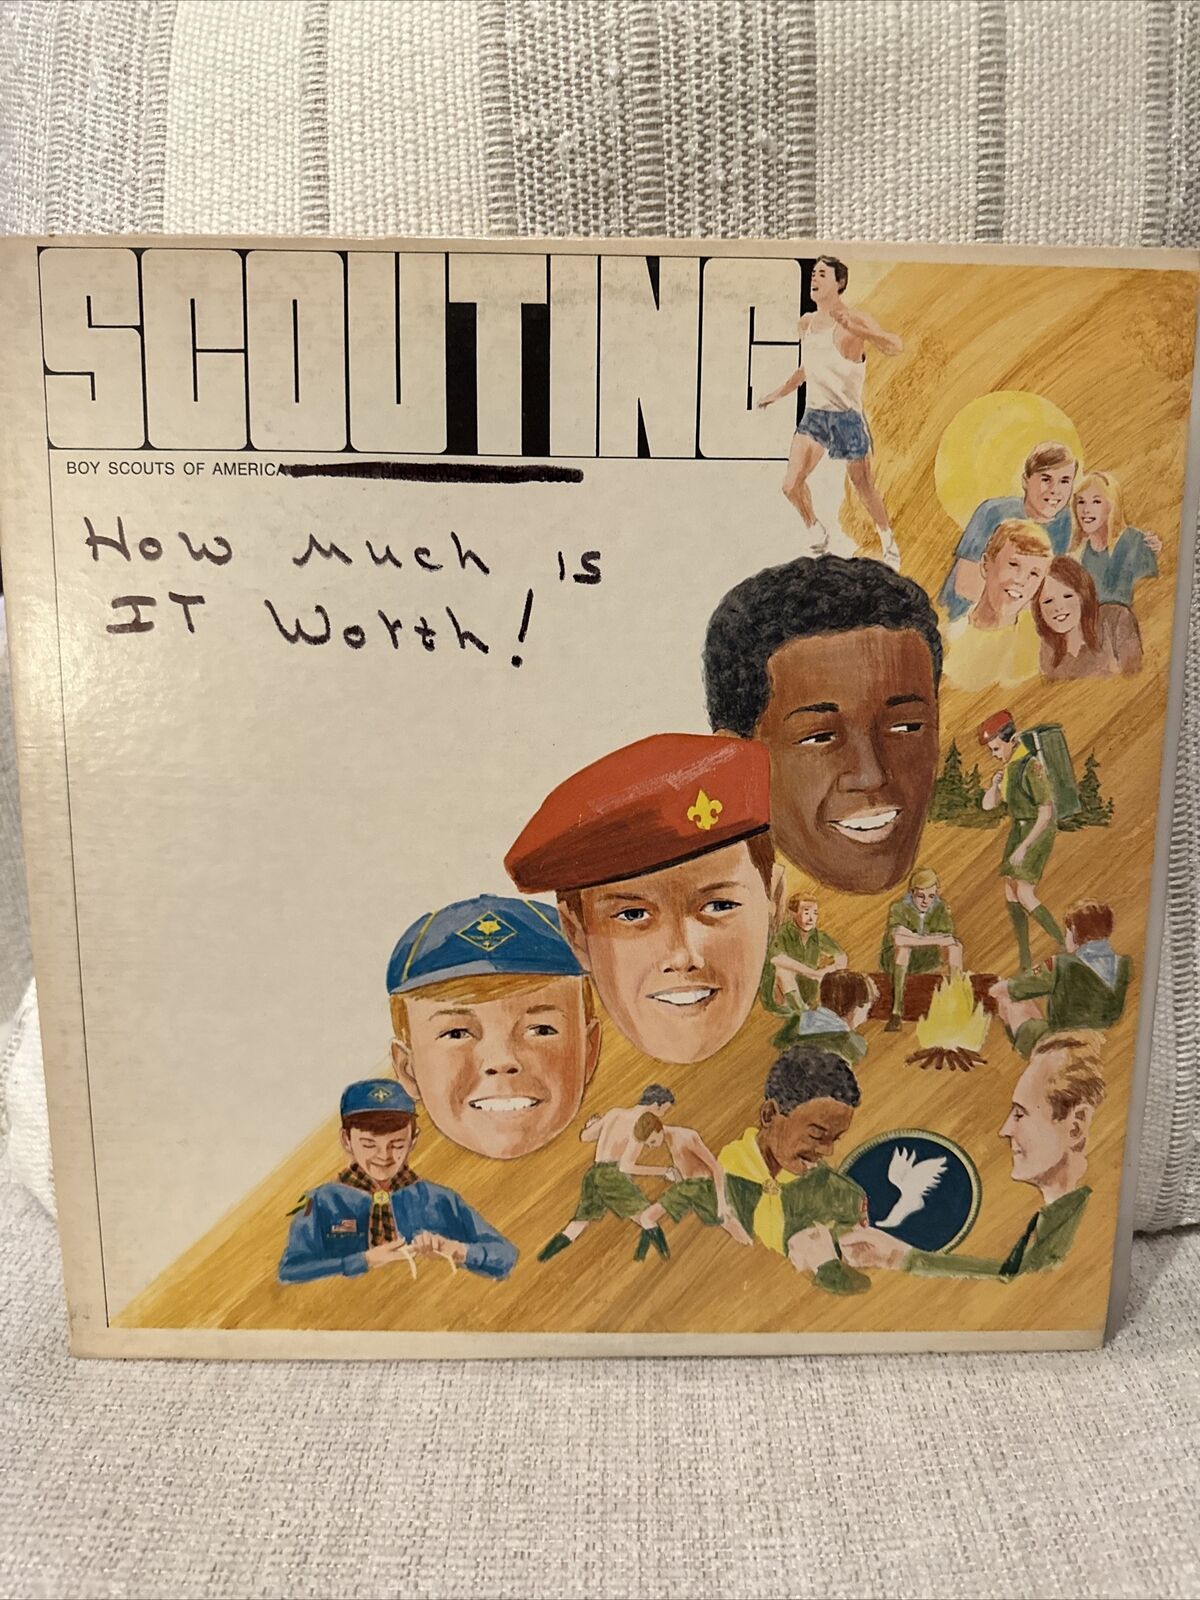 EXTREMELY RARE — How Much Is It Worth, Boy Scouts Of America Memorabilia Vinyl